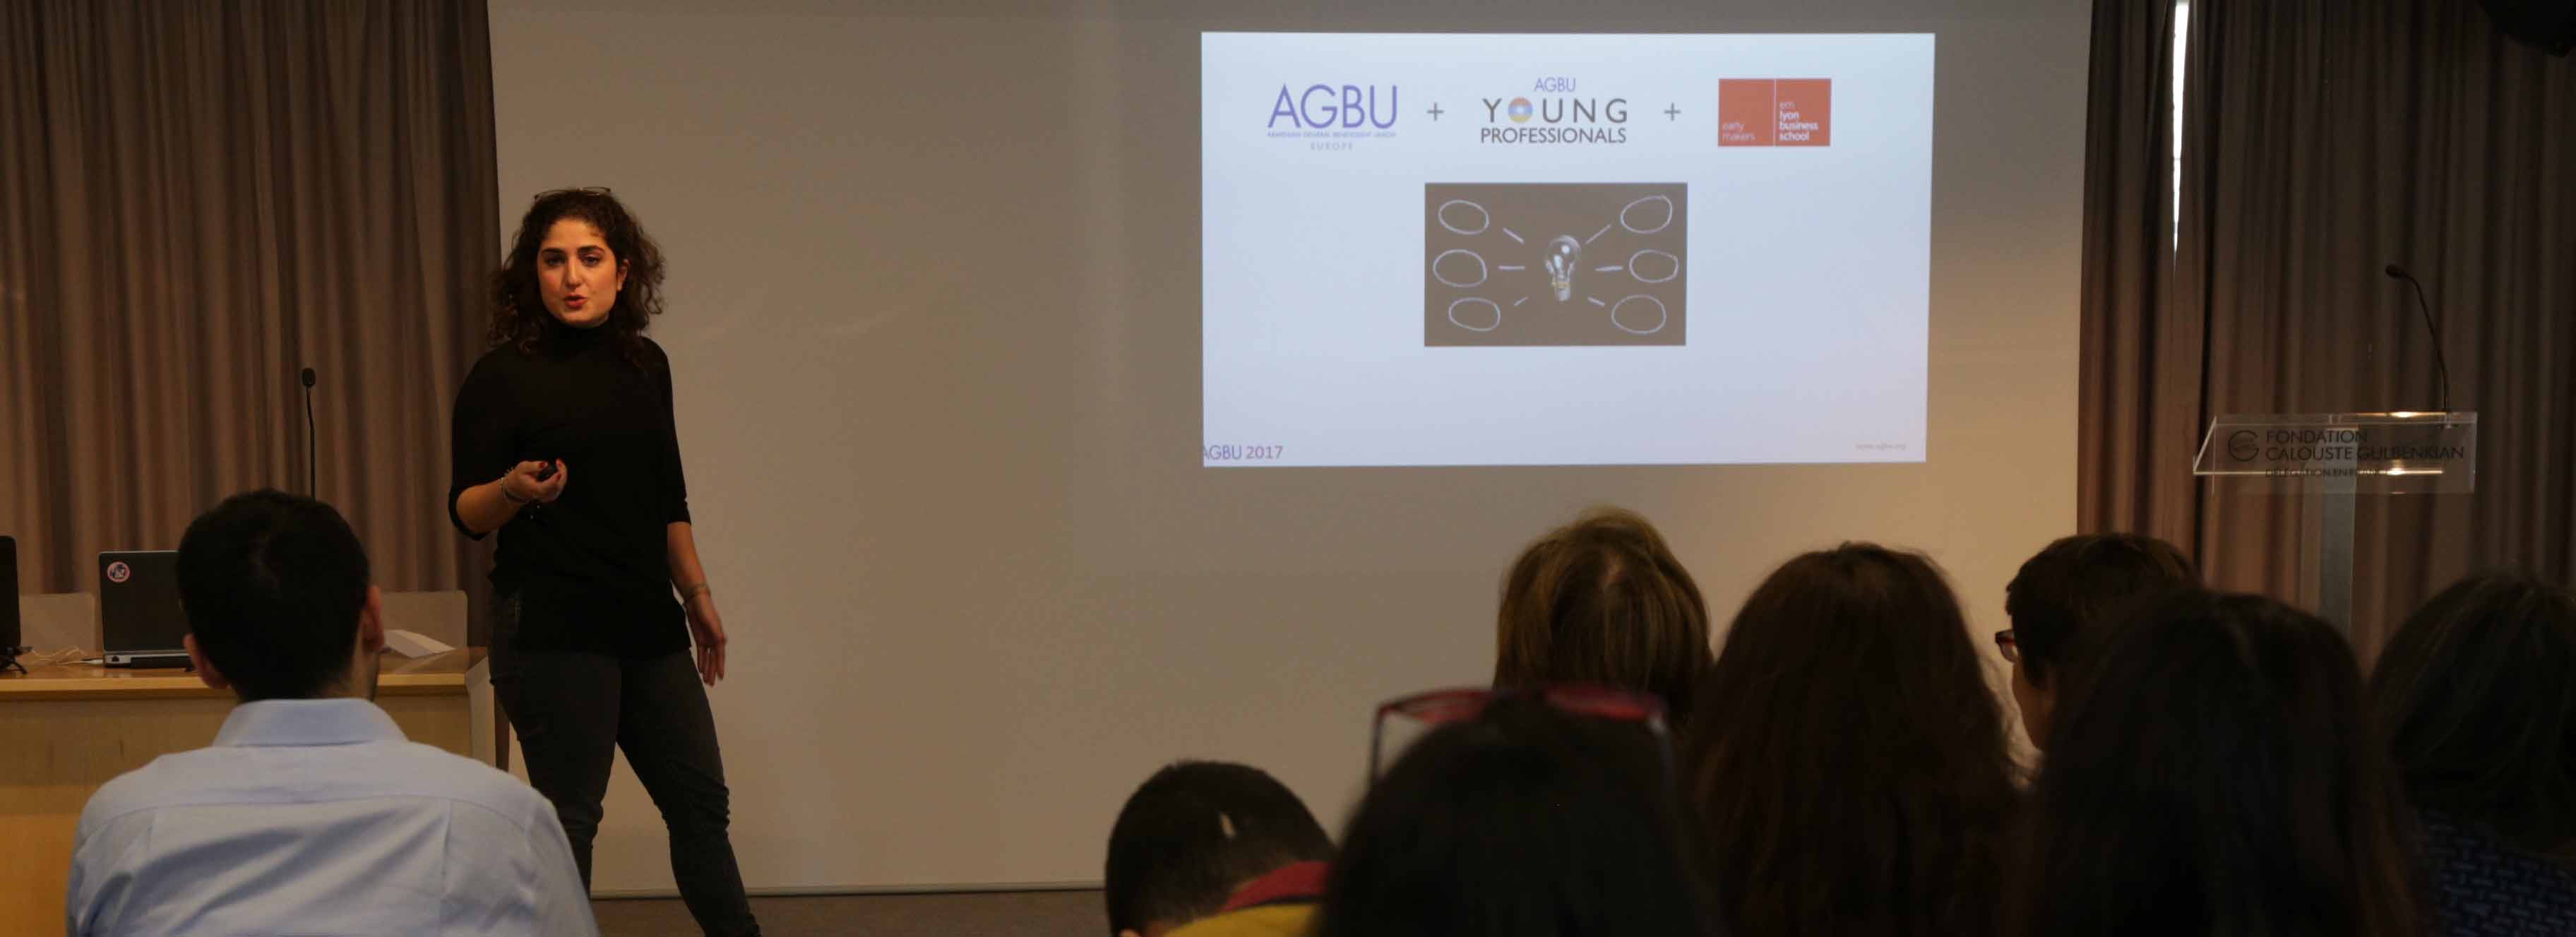 AGBU Young professionals of Europe gather in Paris for their 3rd bi-annual Summit